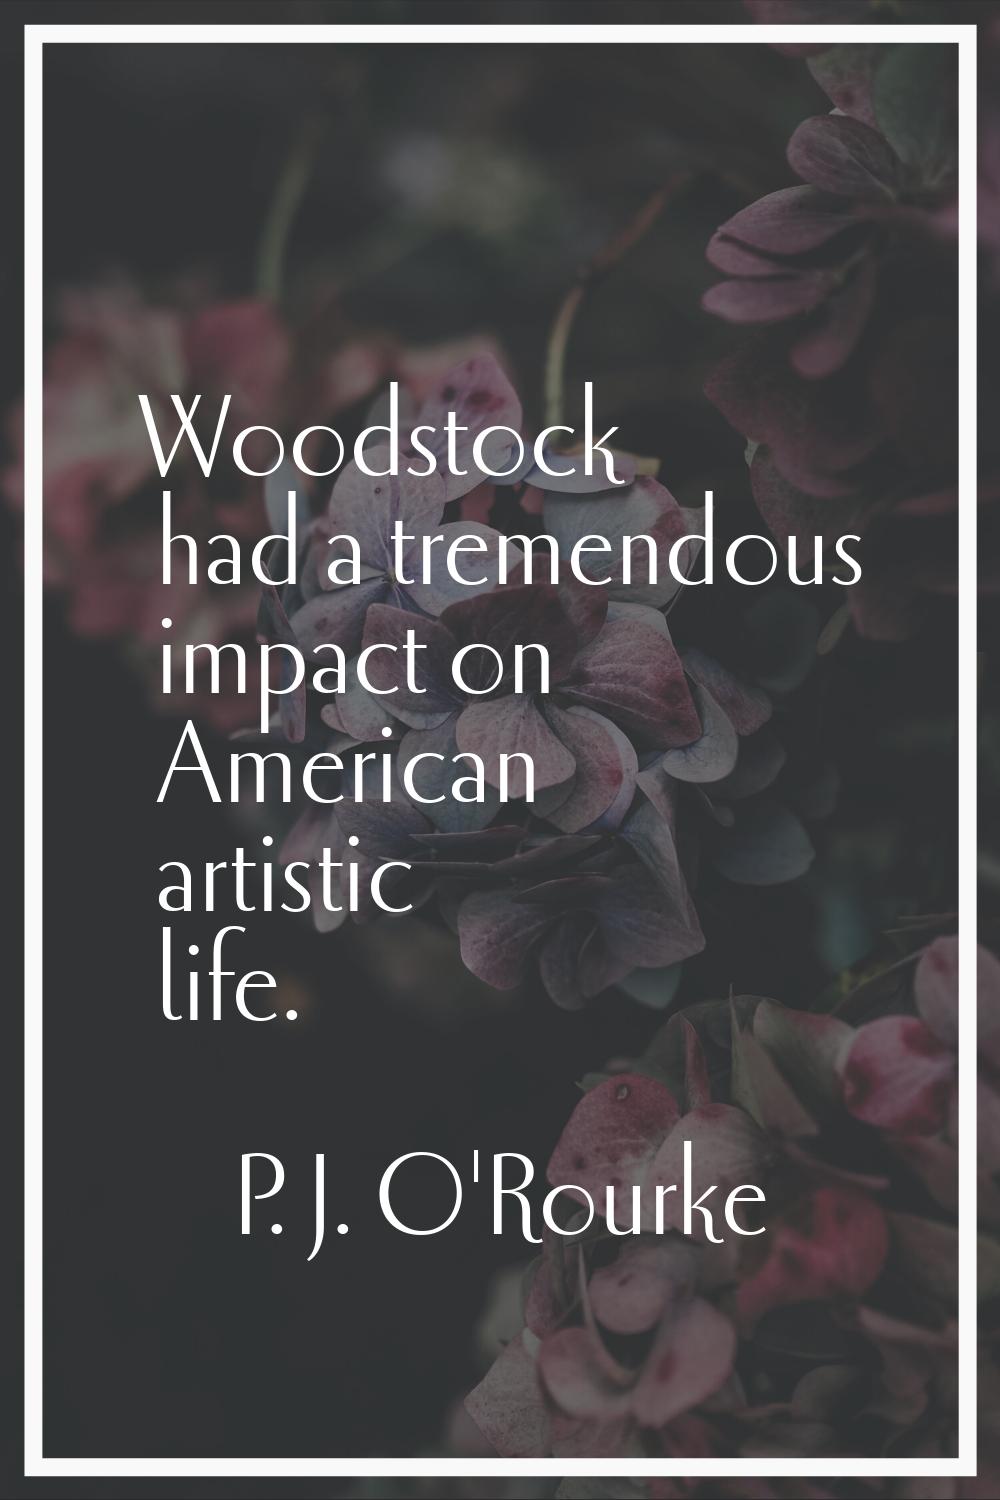 Woodstock had a tremendous impact on American artistic life.